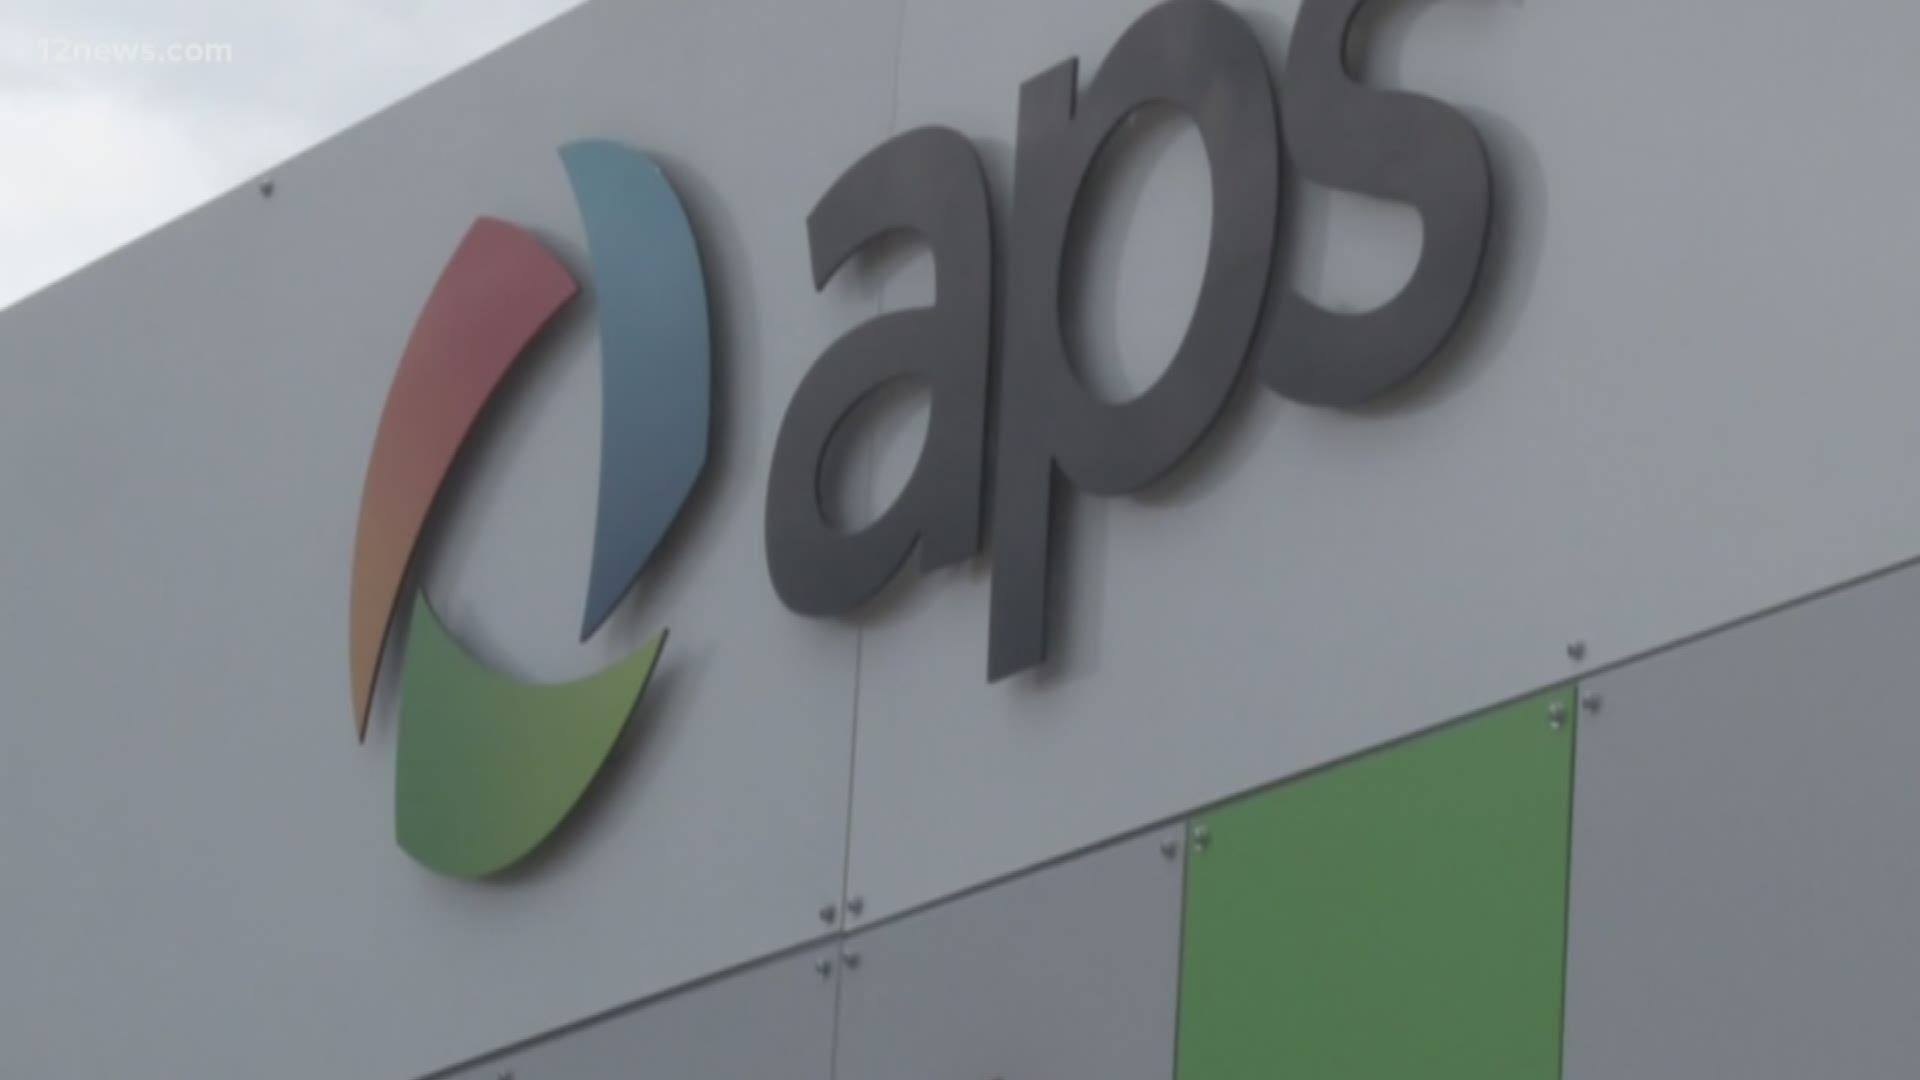 Rates hearings are underway for customers to get answers on if the APS rate increase is fair.